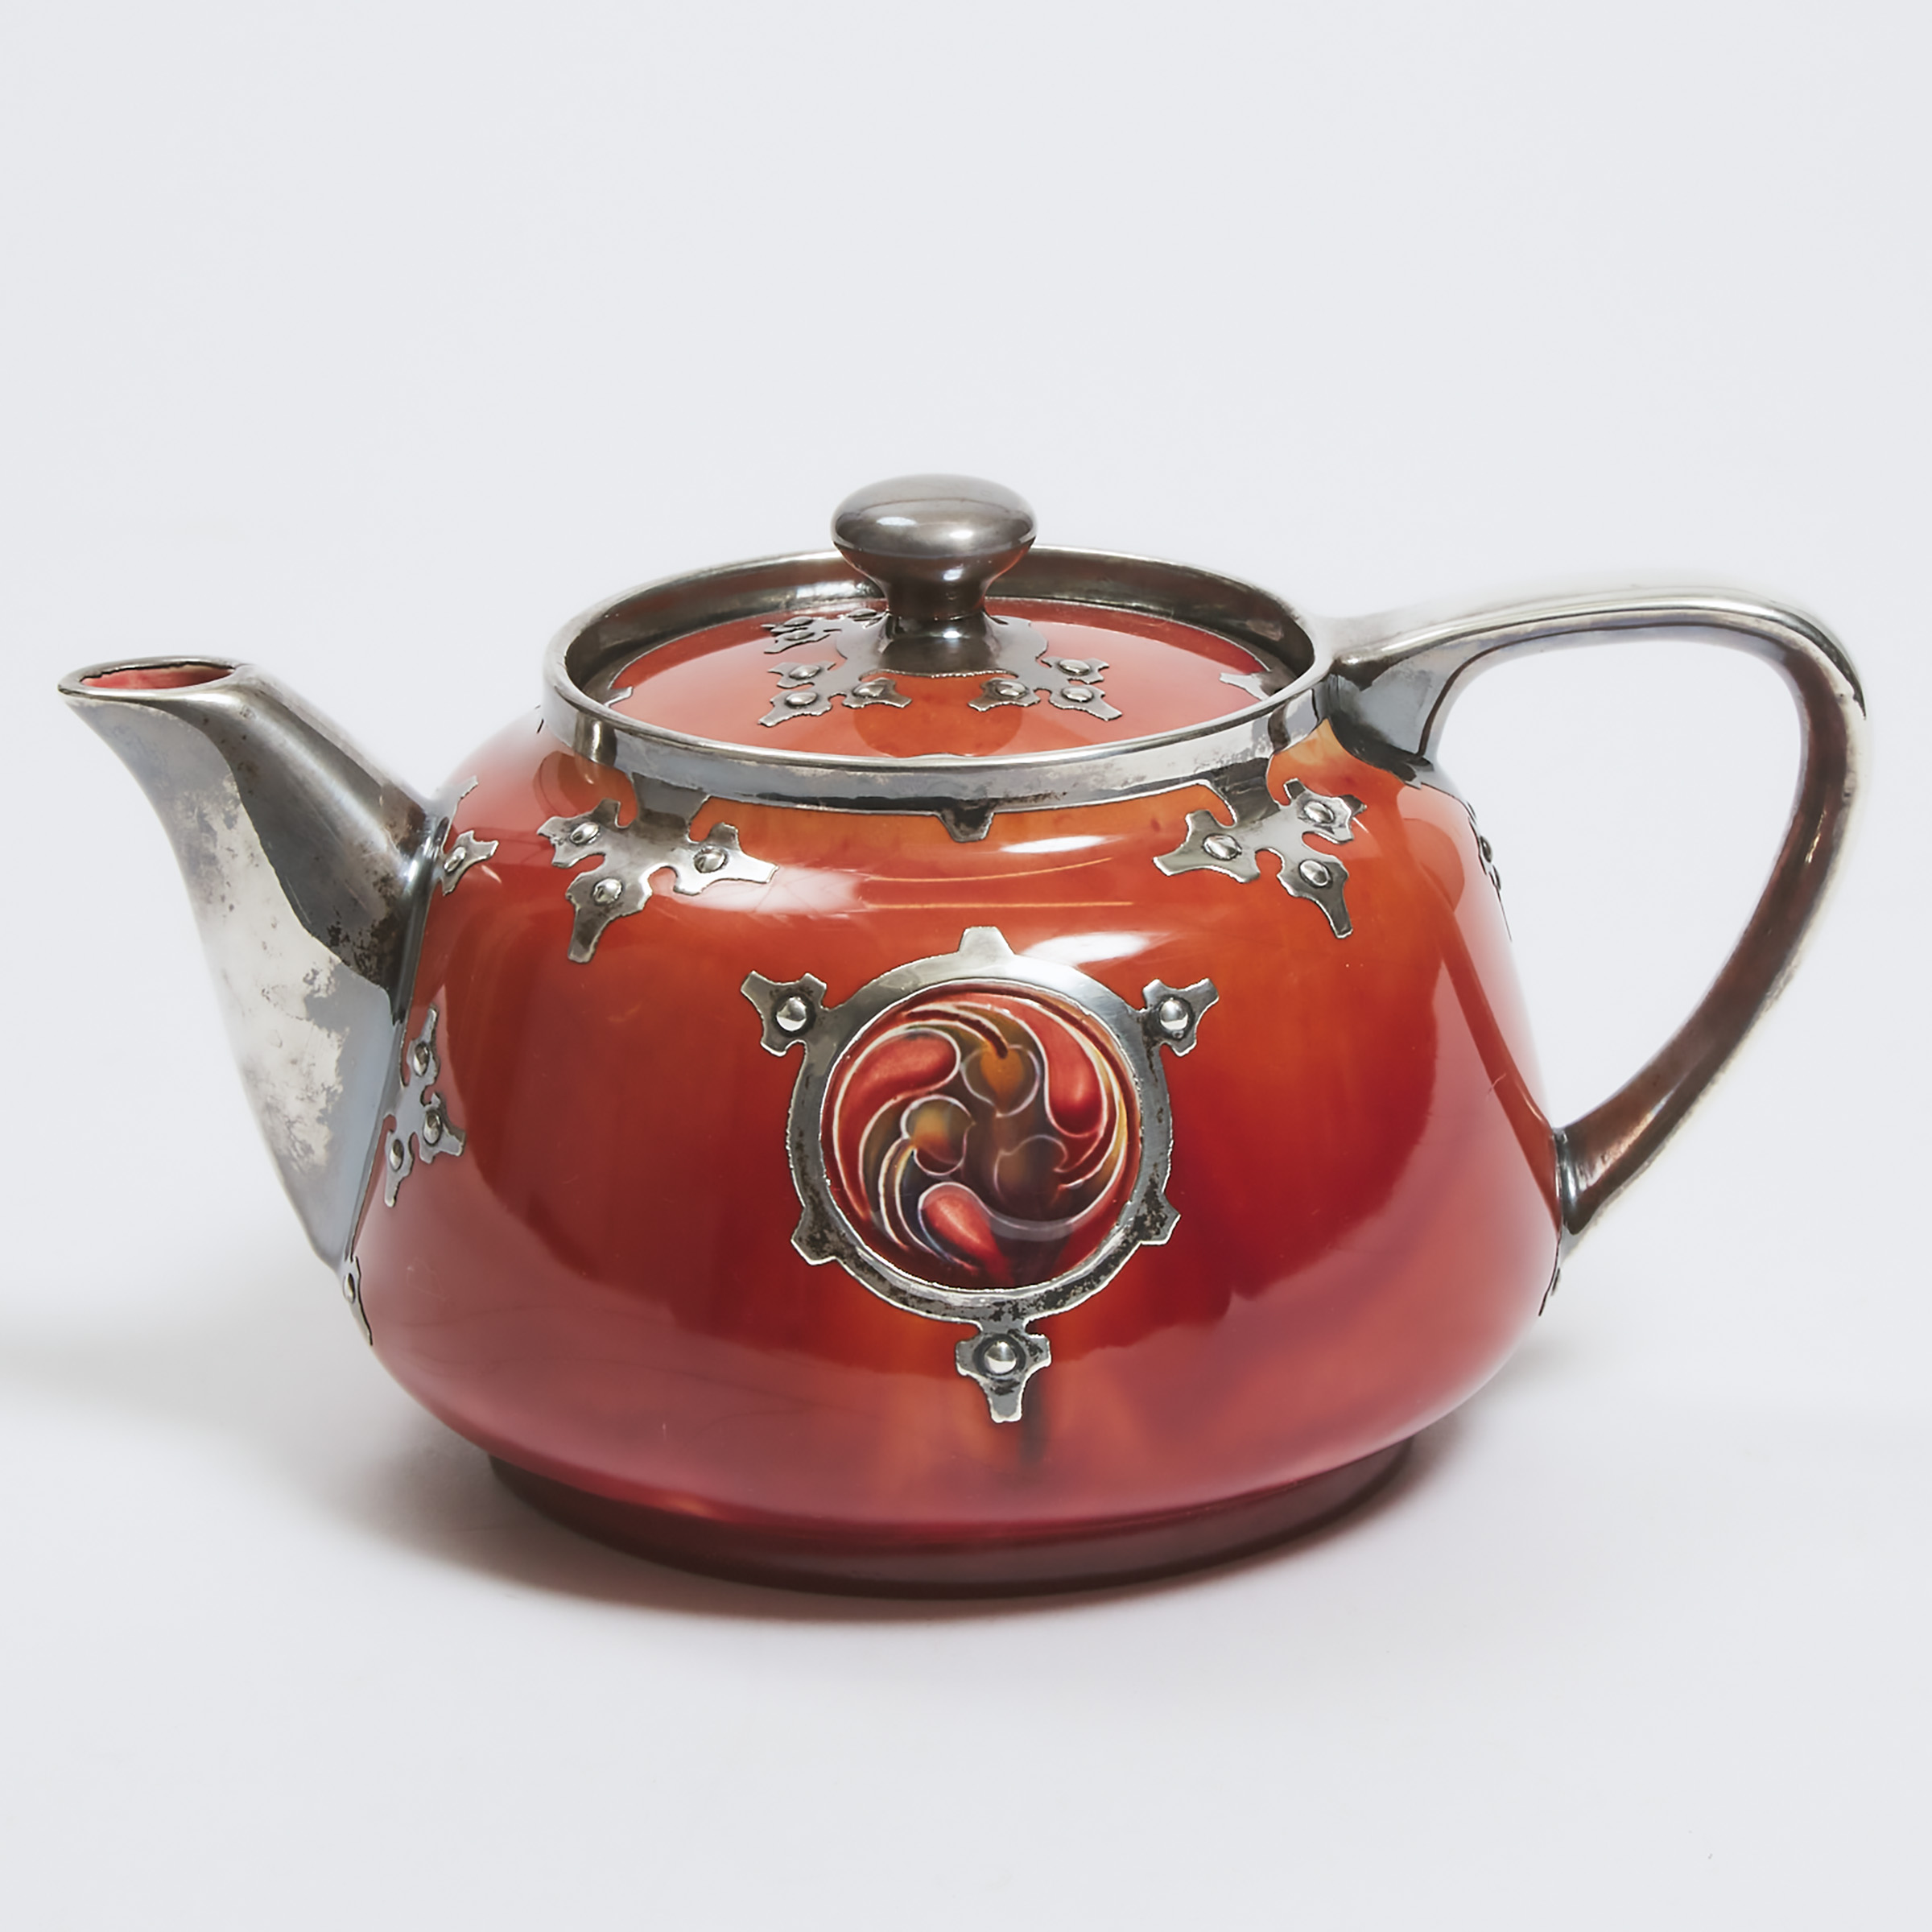 Macintyre Moorcroft Silver Overlaid Red Flamminian Teapot, for Liberty & Co., 1906-13